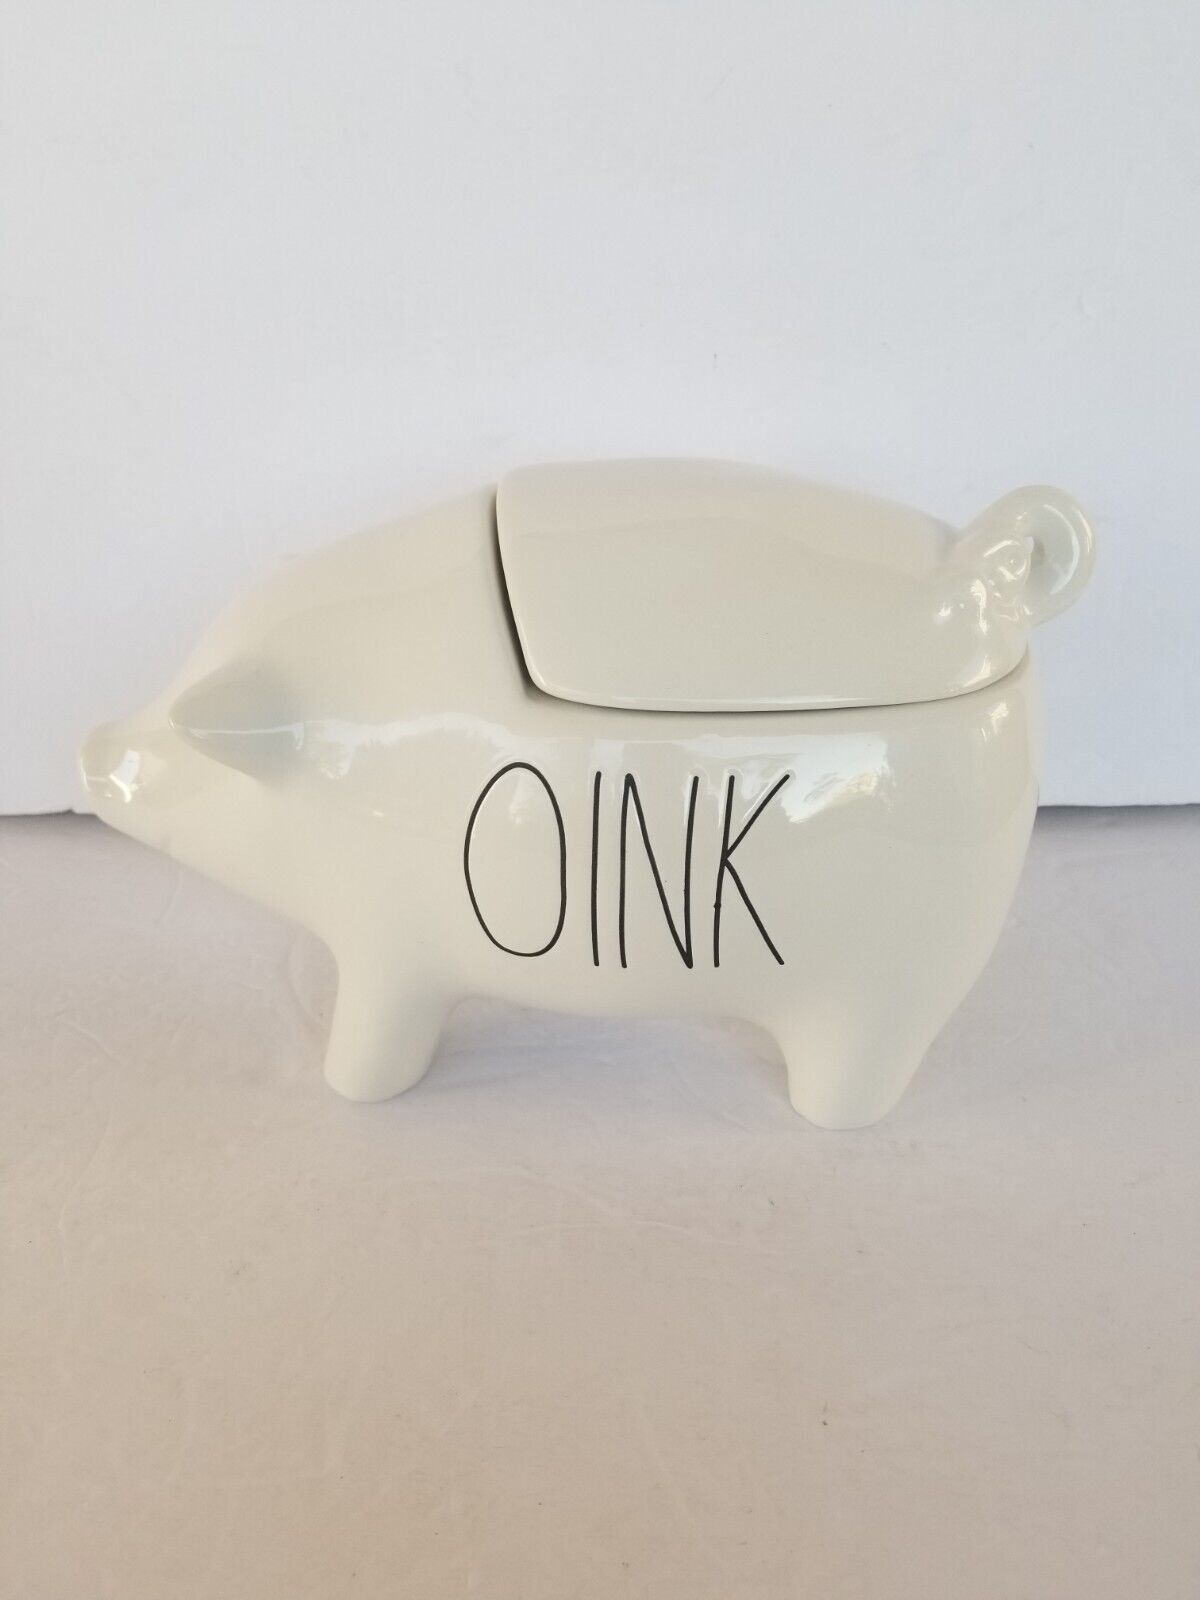 New Rae Dunn Oink Canister White Pig Cookie Jar. Rare